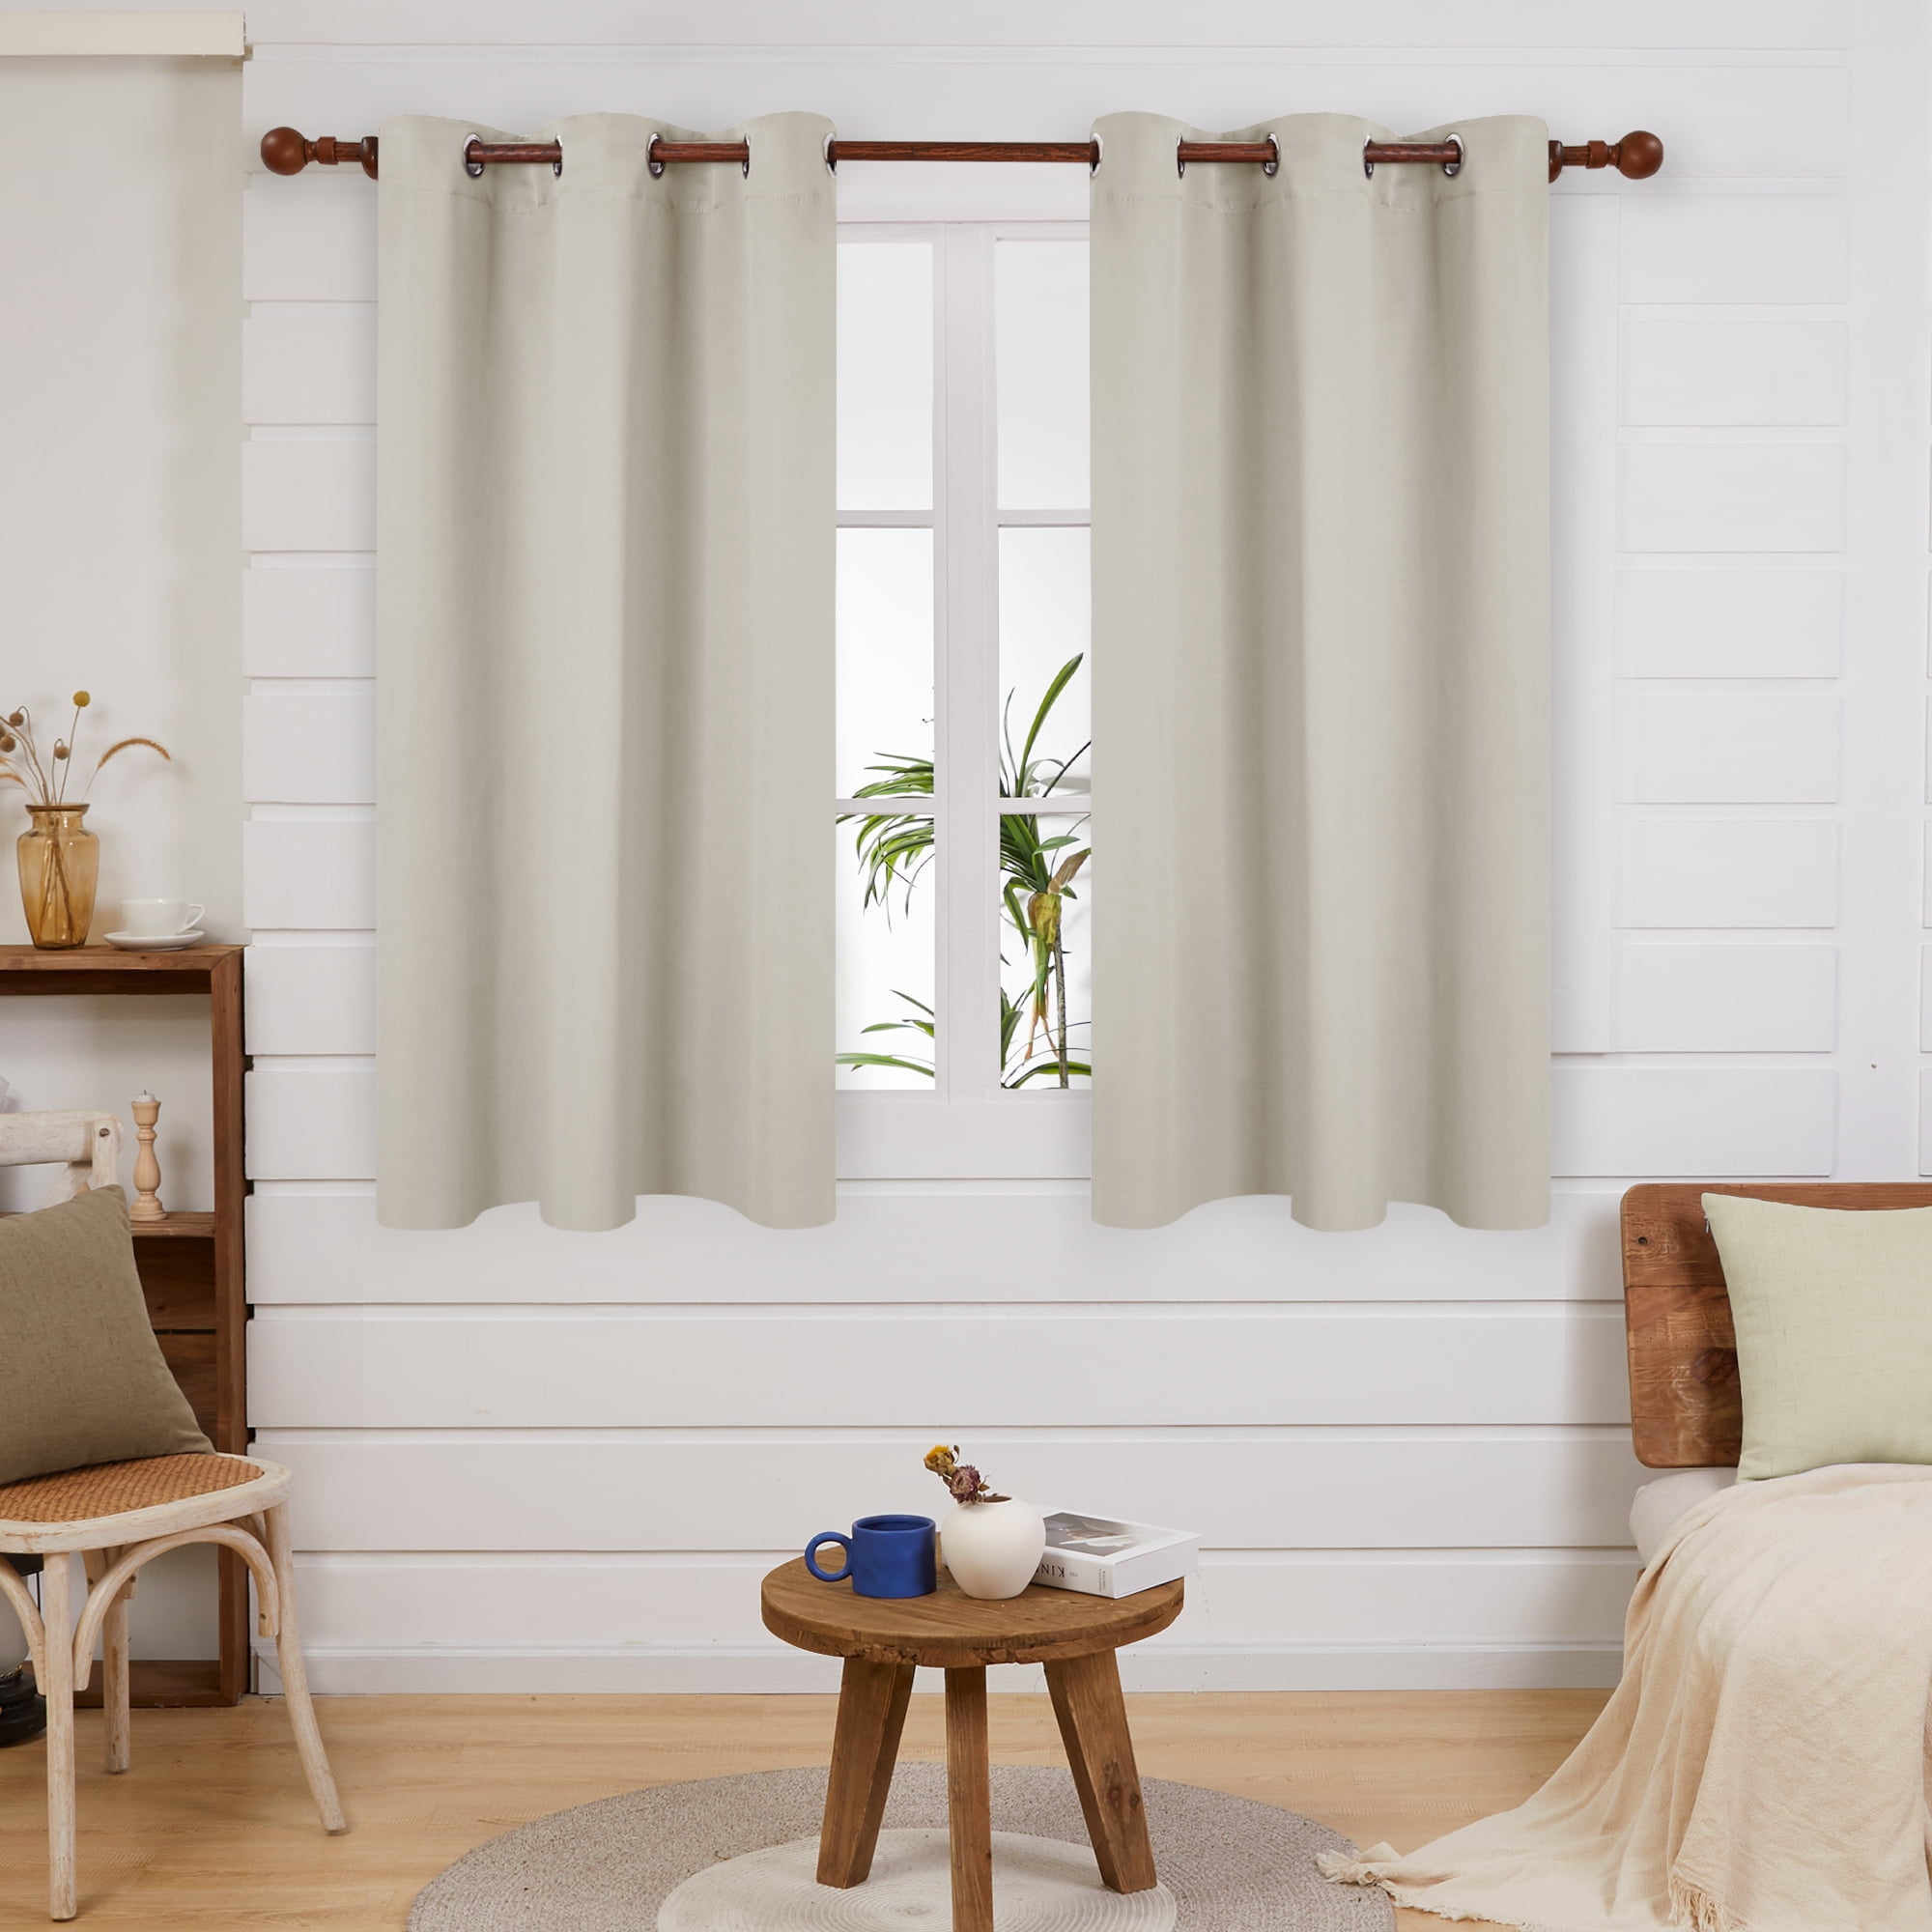 38x63 Inch Details about   Deconovo Blackout Curtains for Bedroom Set of 2 Panels with Tiebacks 